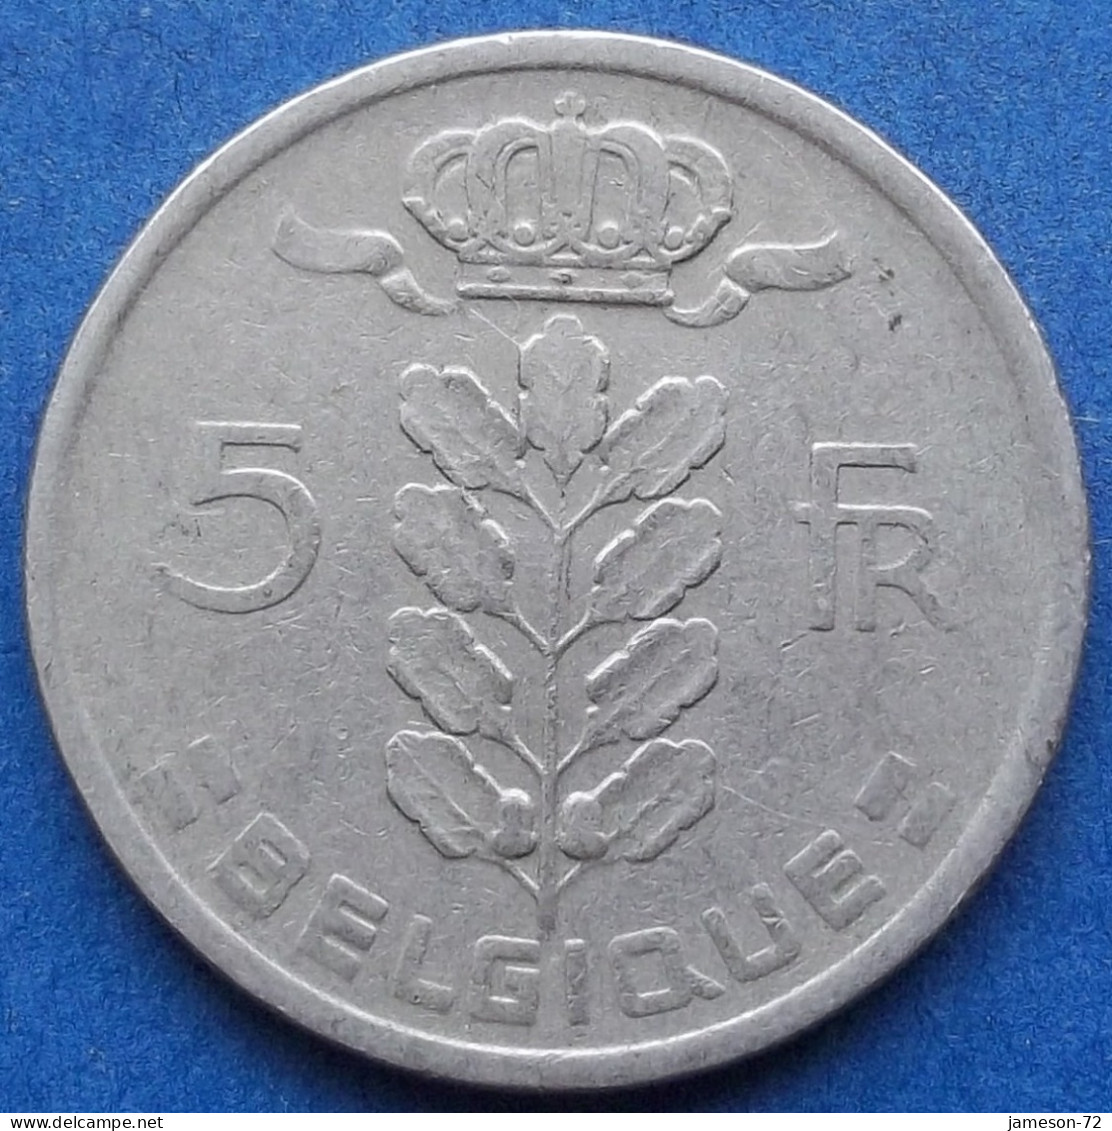 BELGIUM - 5 Francs 1949 French KM# 134.1 Leopold III (1934-1950) - Edelweiss Coins - 5 Francs